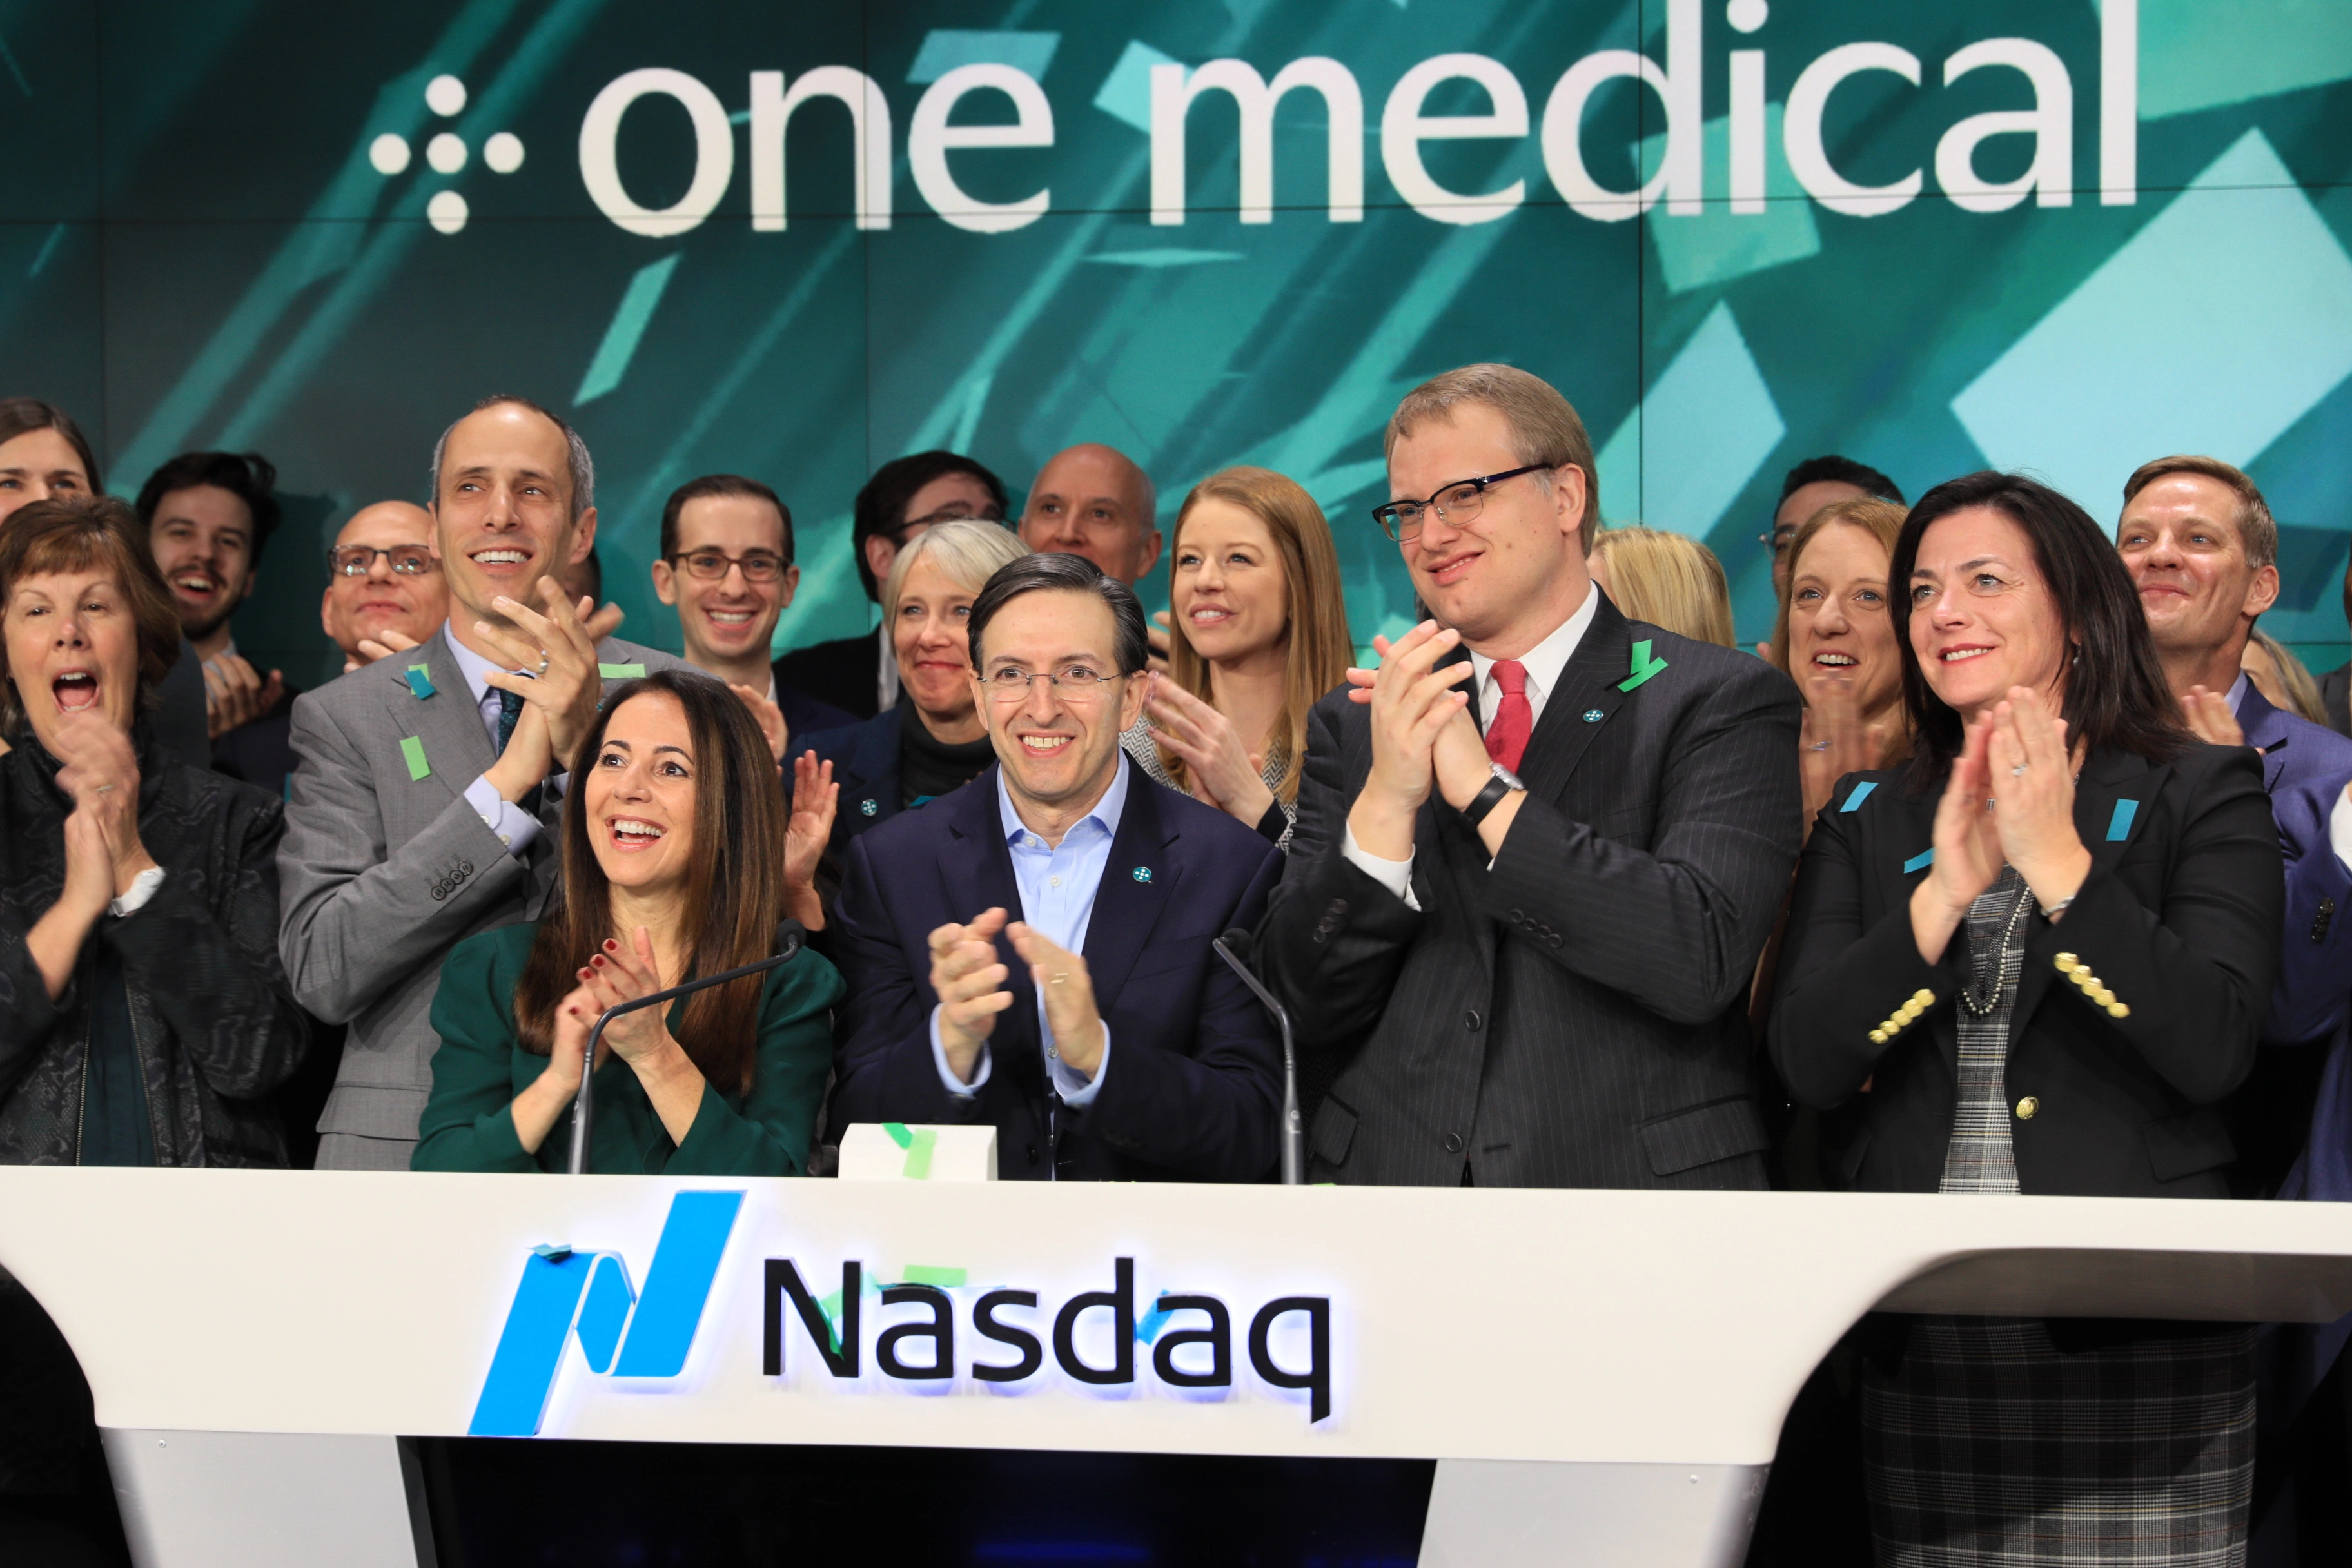 Amazon and One Medical Sign an Agreement for Amazon to Acquire One Medical